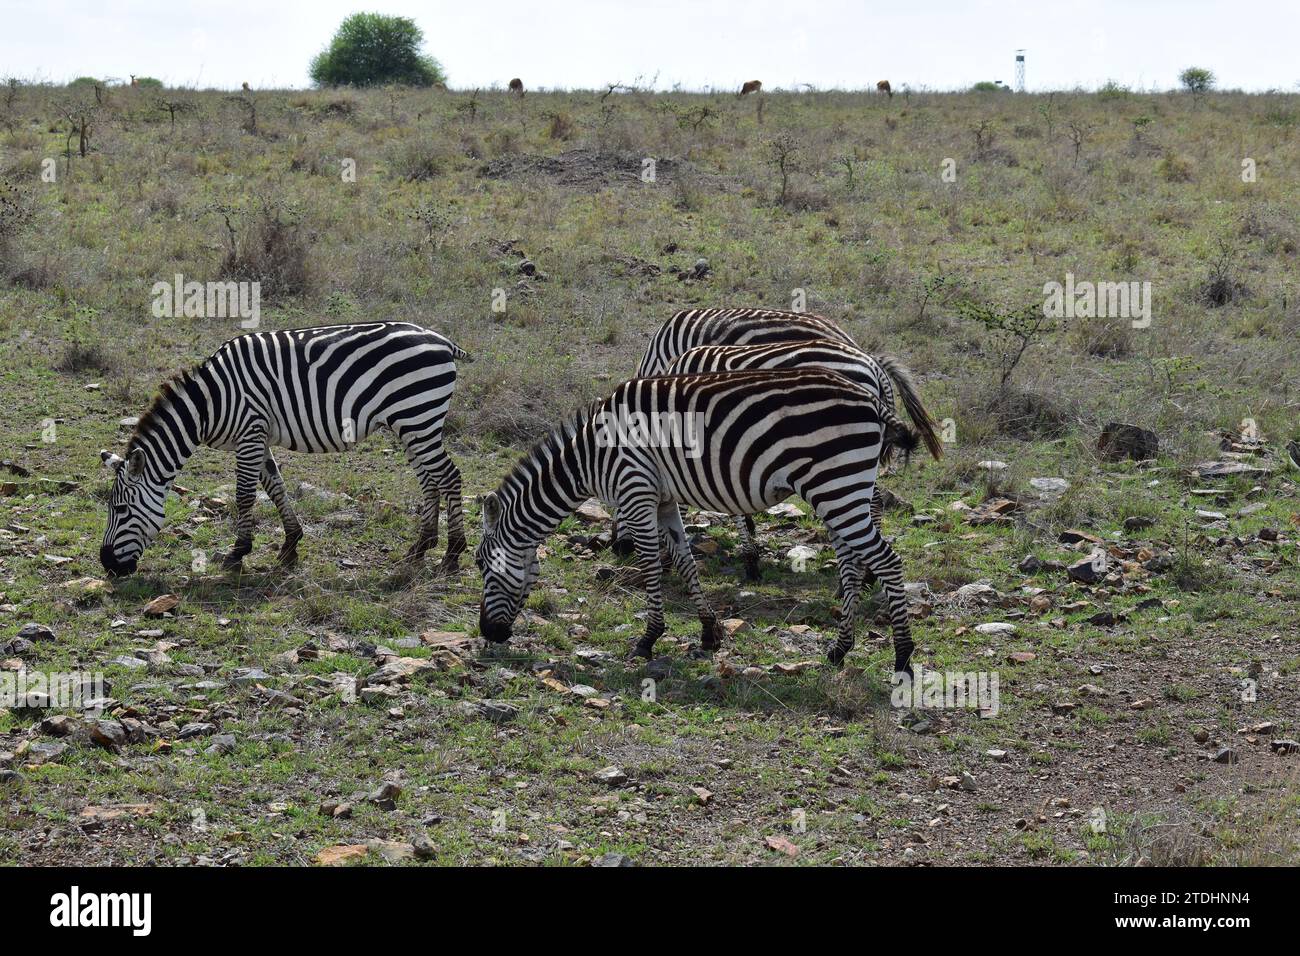 A herd of zebras grazing on the grass plains in Nairobi National Park Stock Photo